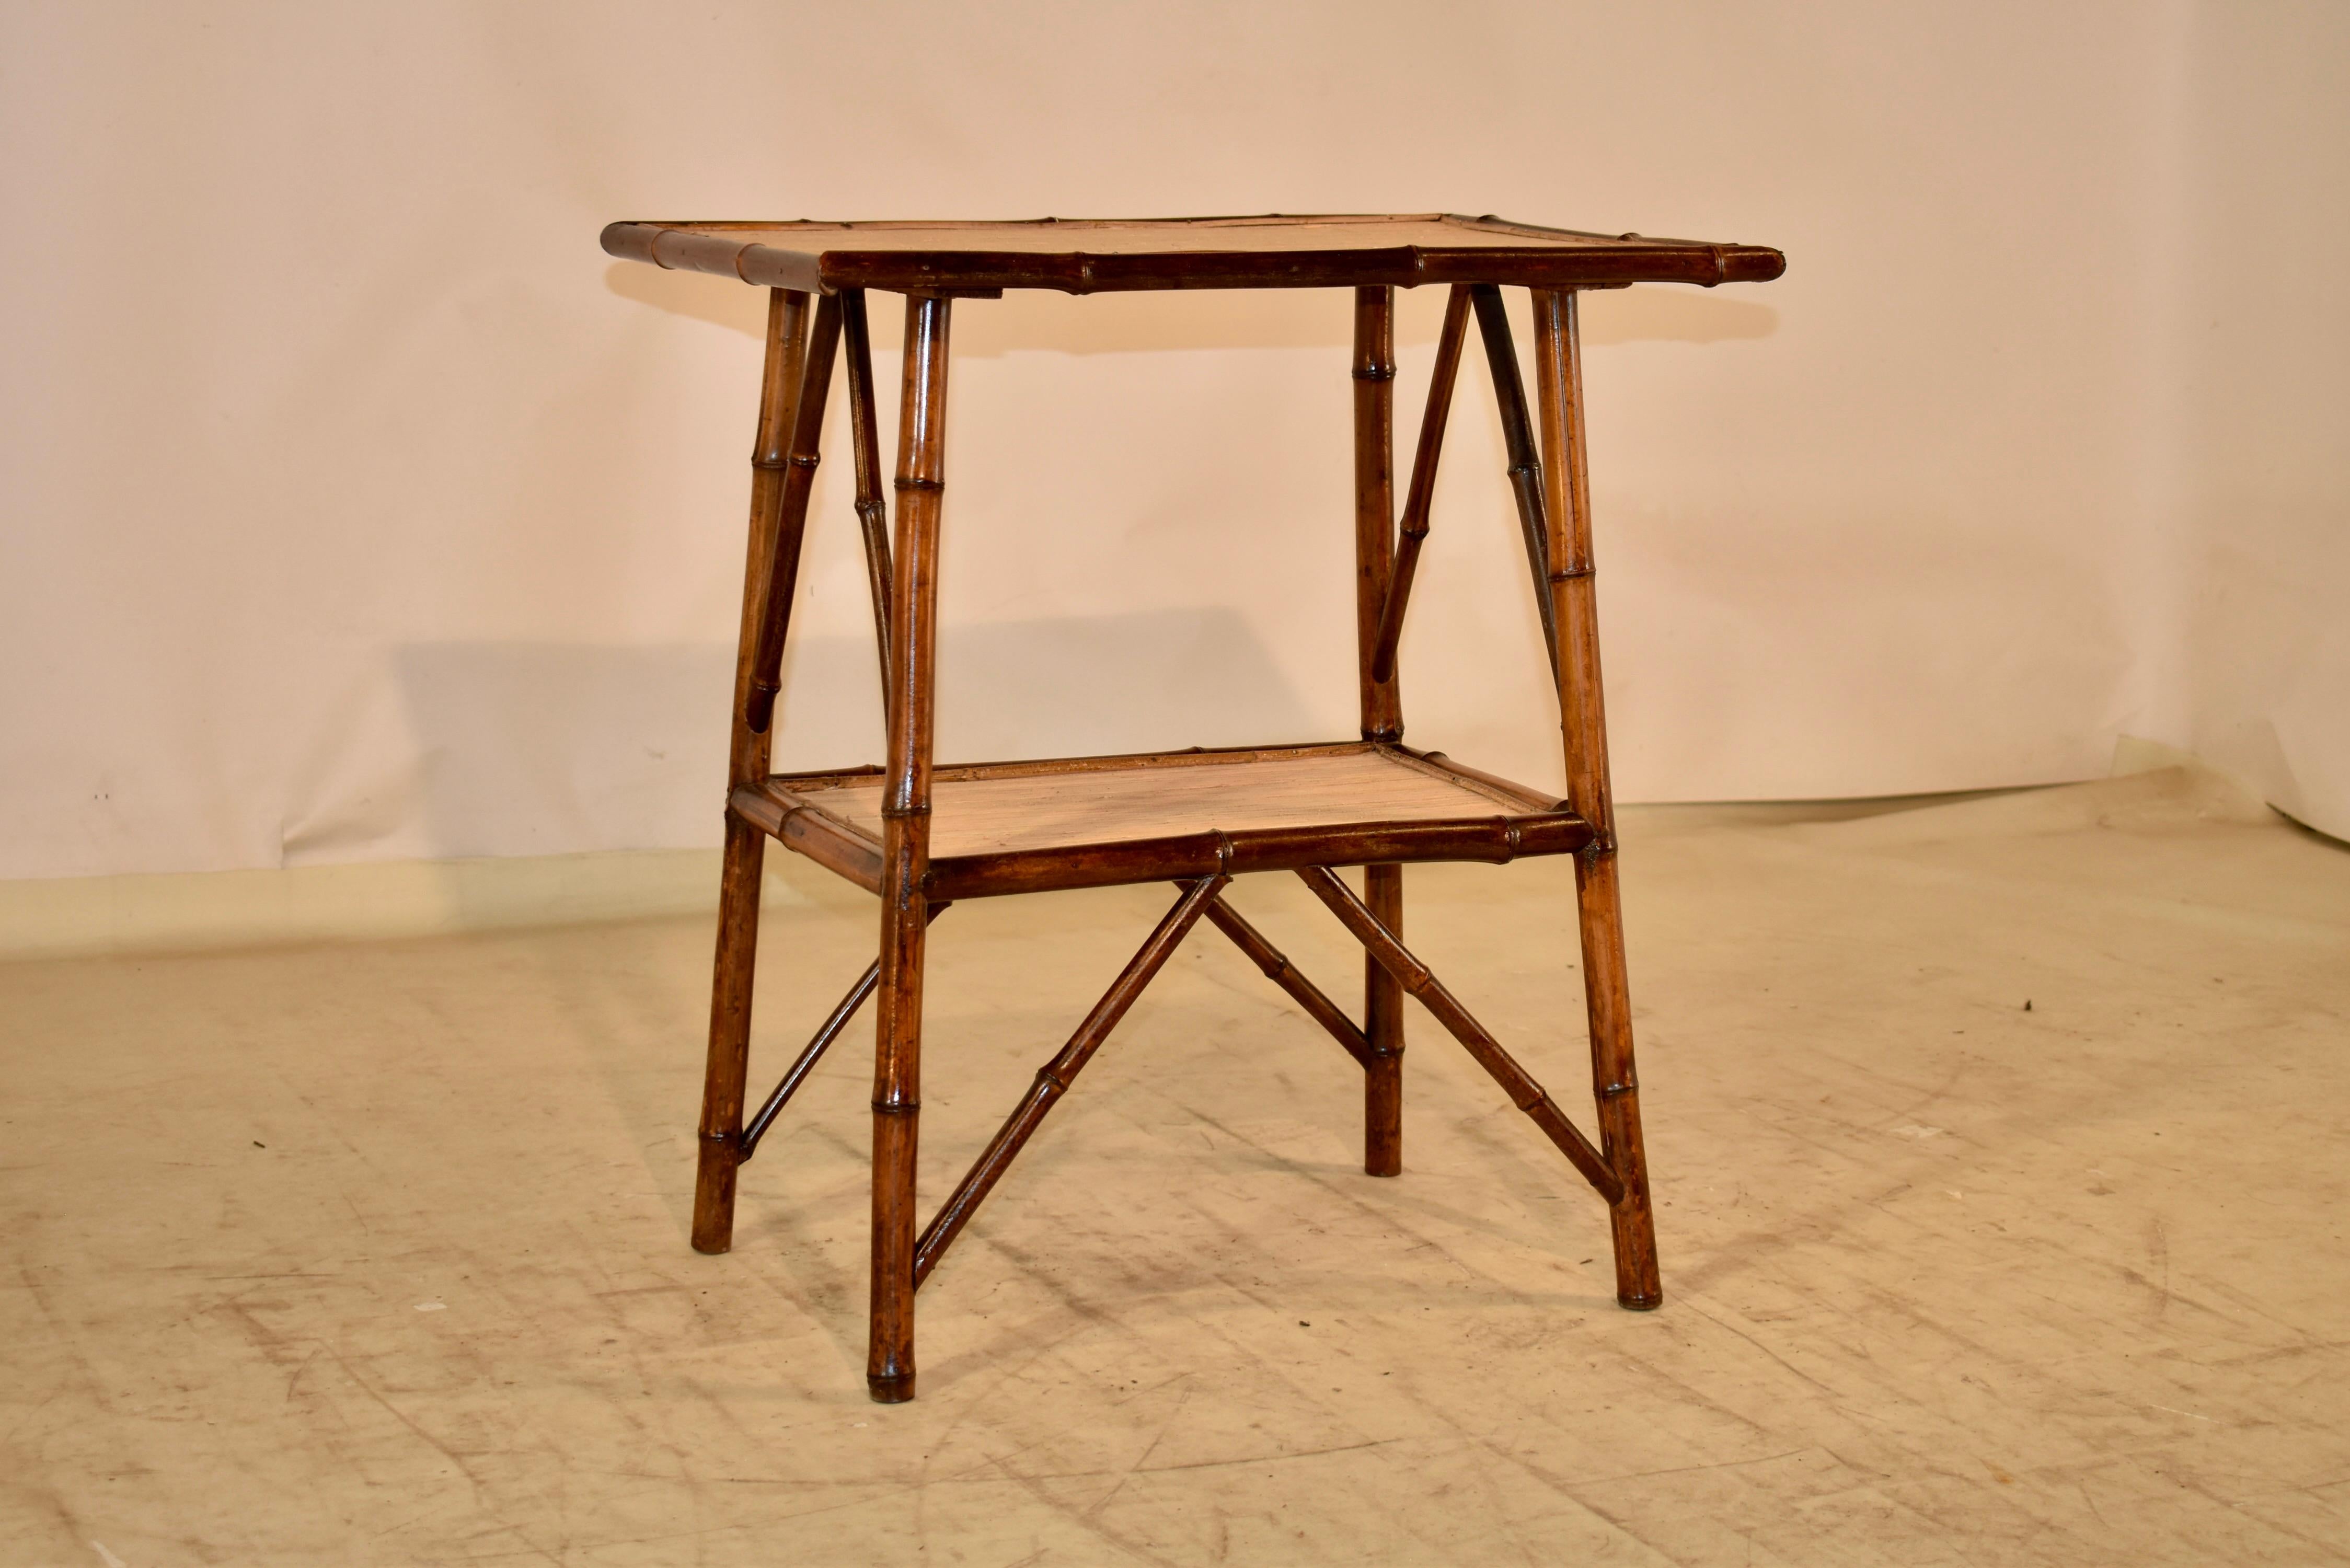 19th century bamboo side table from France.  The top of the table has edges banded in bamboo trim, and is supported on splayed bamboo legs, joint by a lower shelf, also trimmed with bamboo trim.  Both the top and lower shelves are covered in